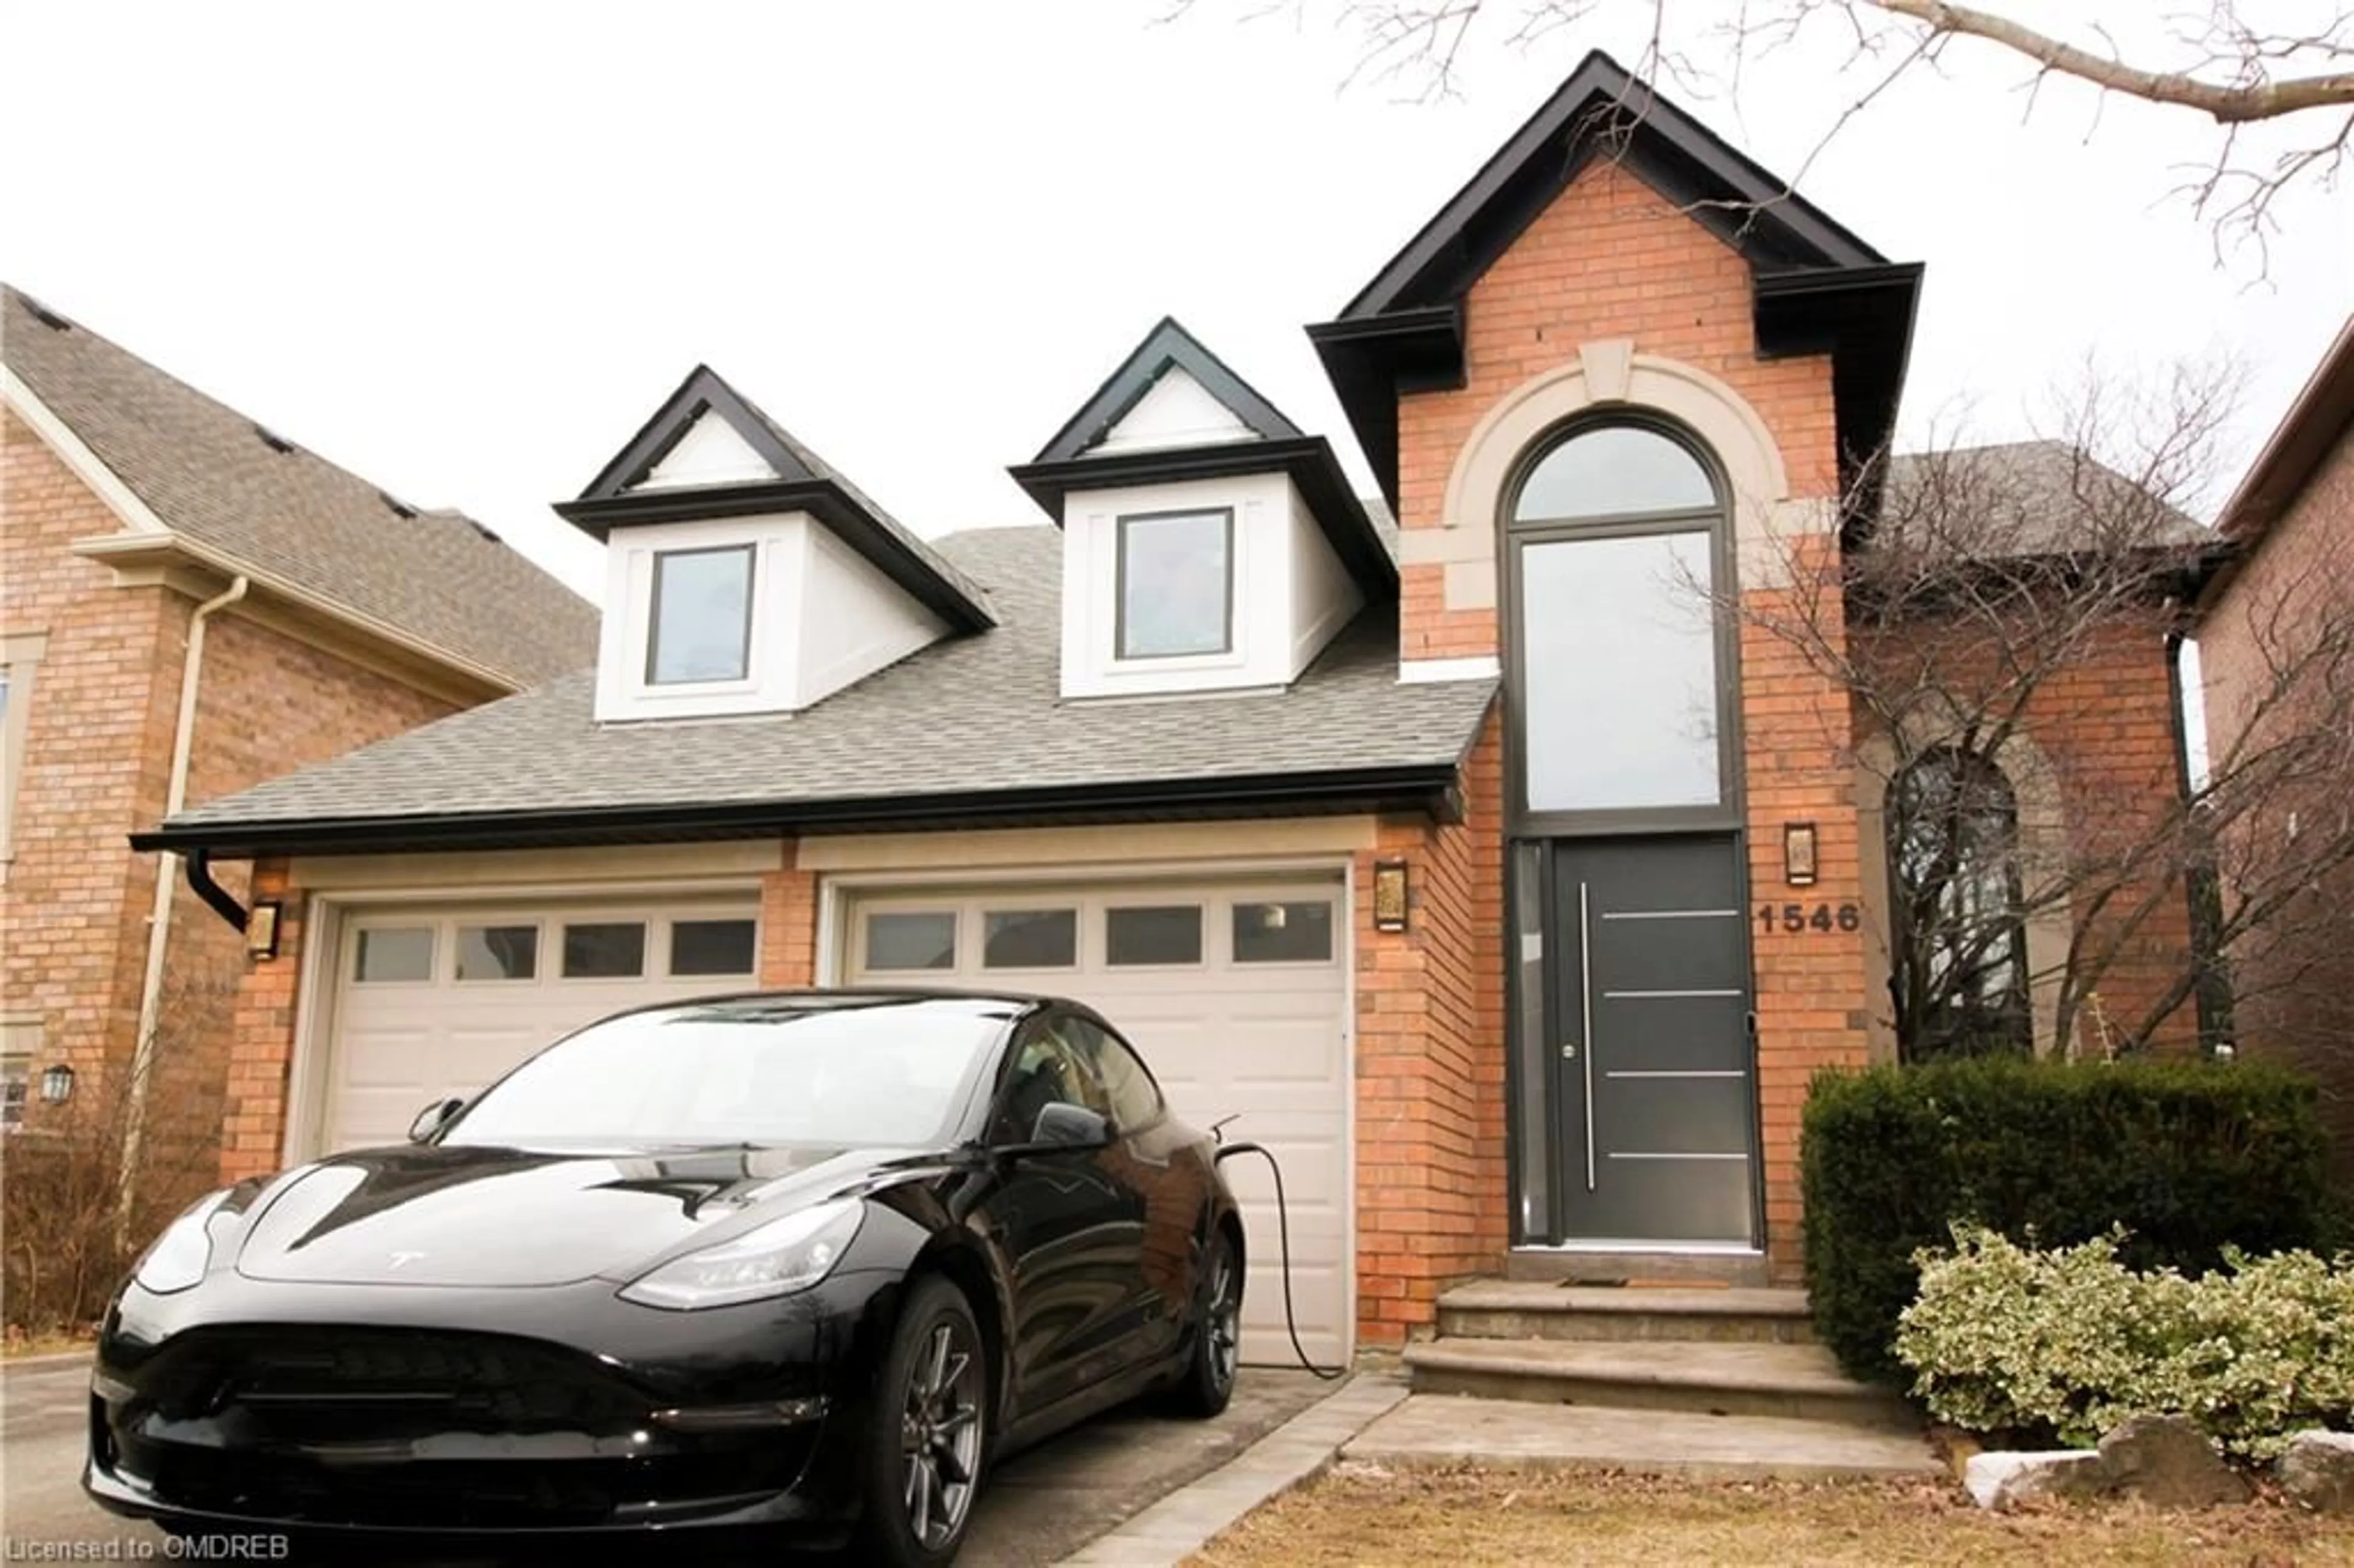 Home with brick exterior material for 1546 Sandpiper Rd, Oakville Ontario L6M 3R7